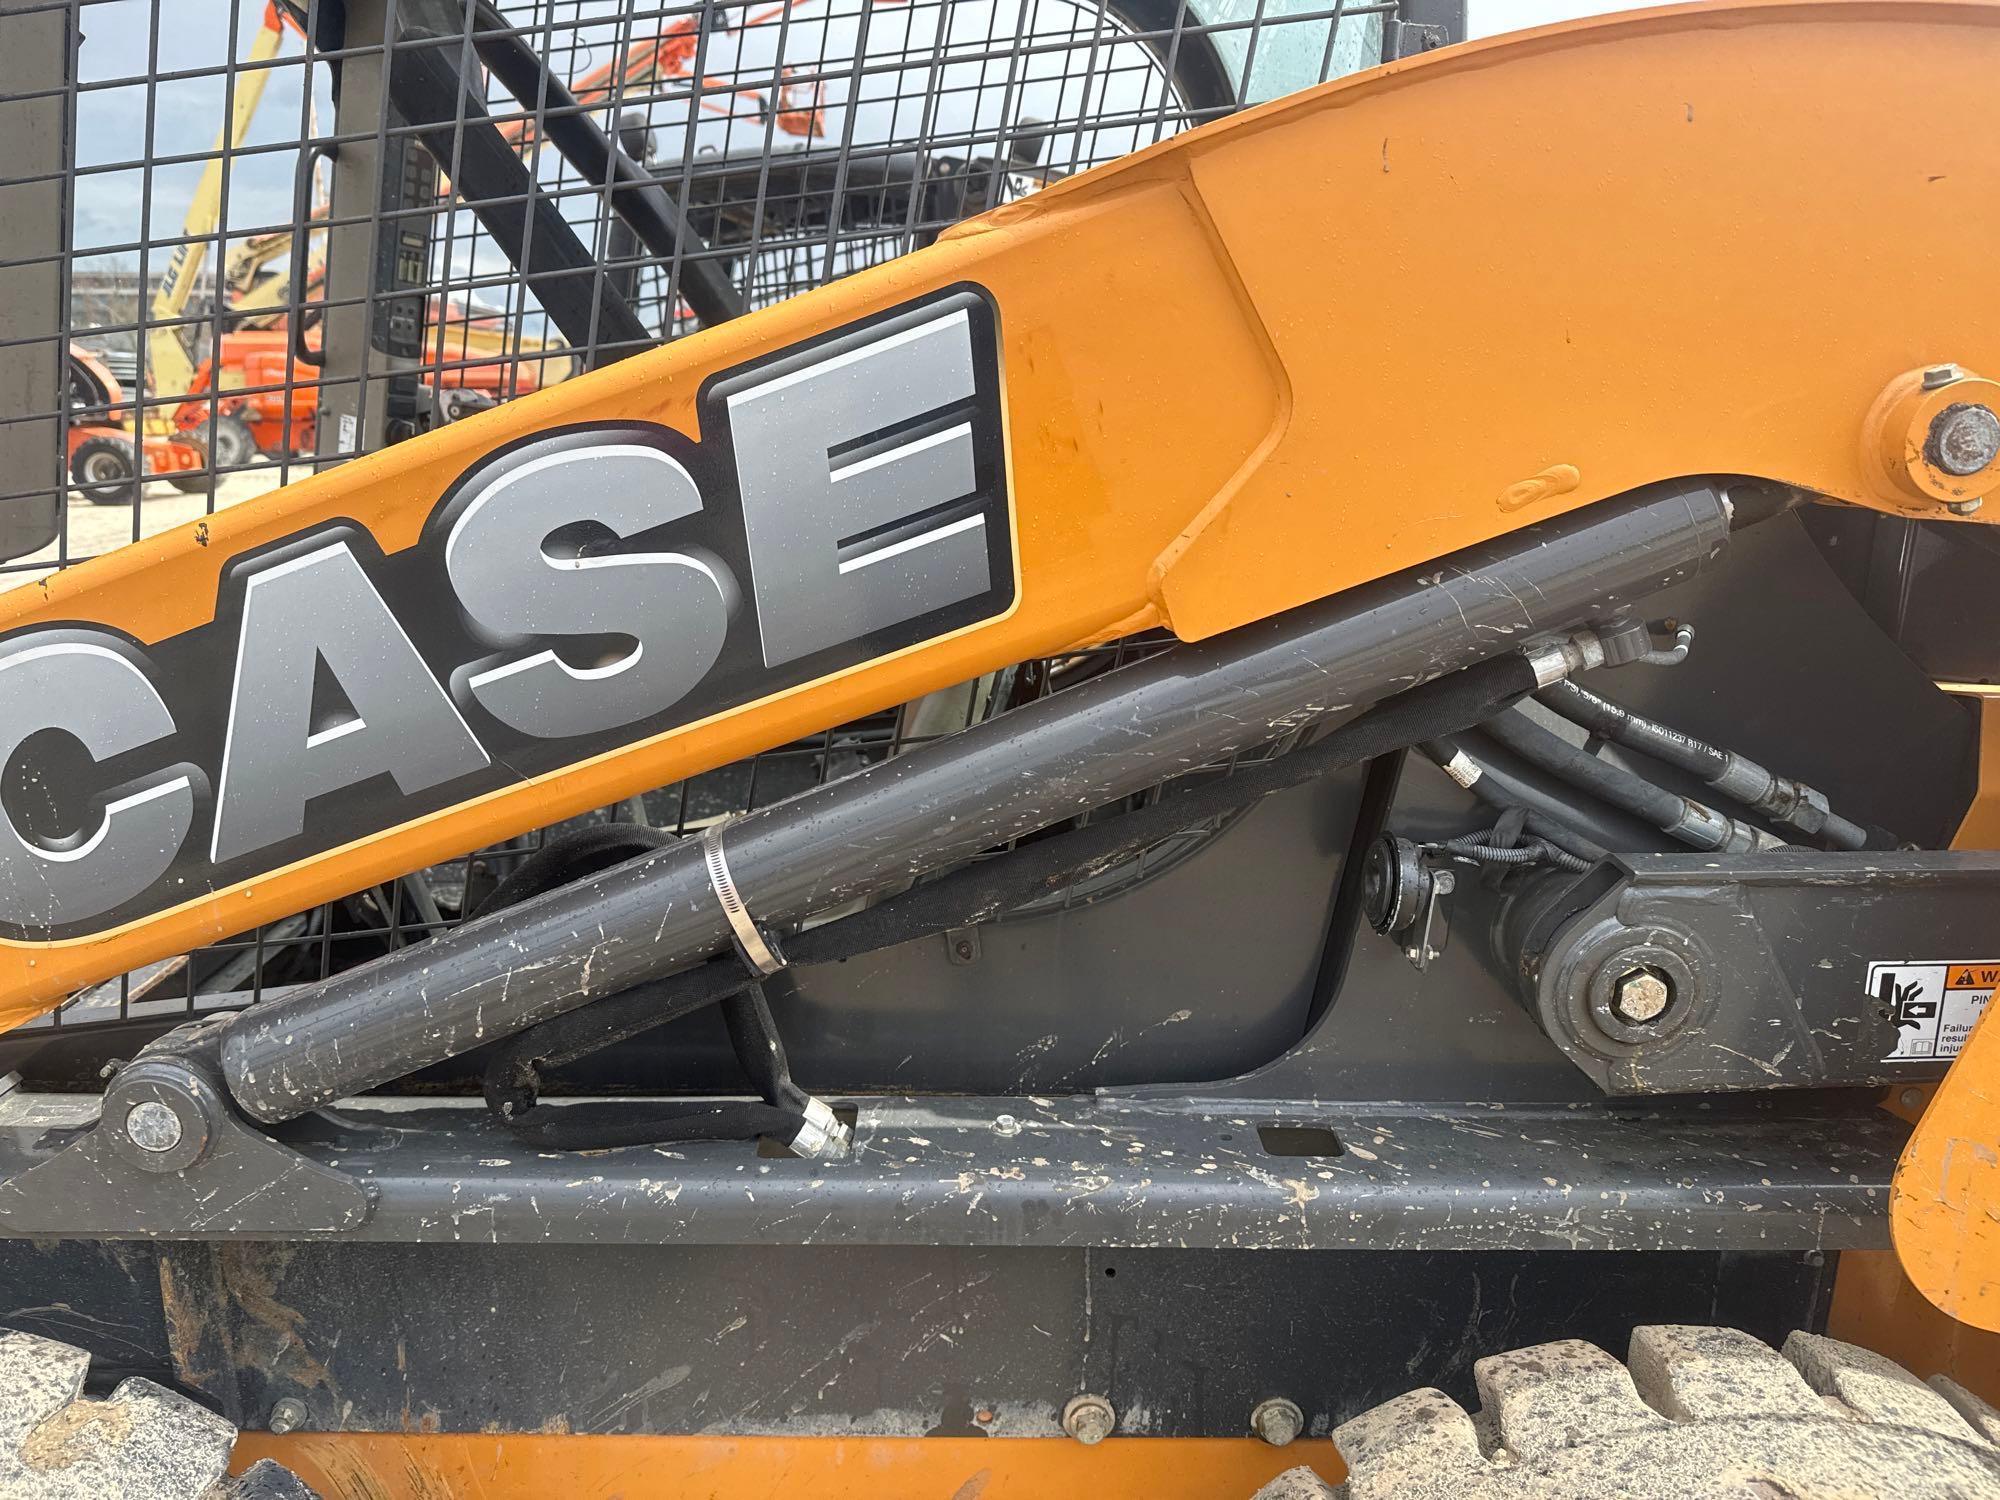 2015 CASE SV300 SKID STEER SN:TFM406675 powered by diesel engine, equipped with rollcage, auxiliary